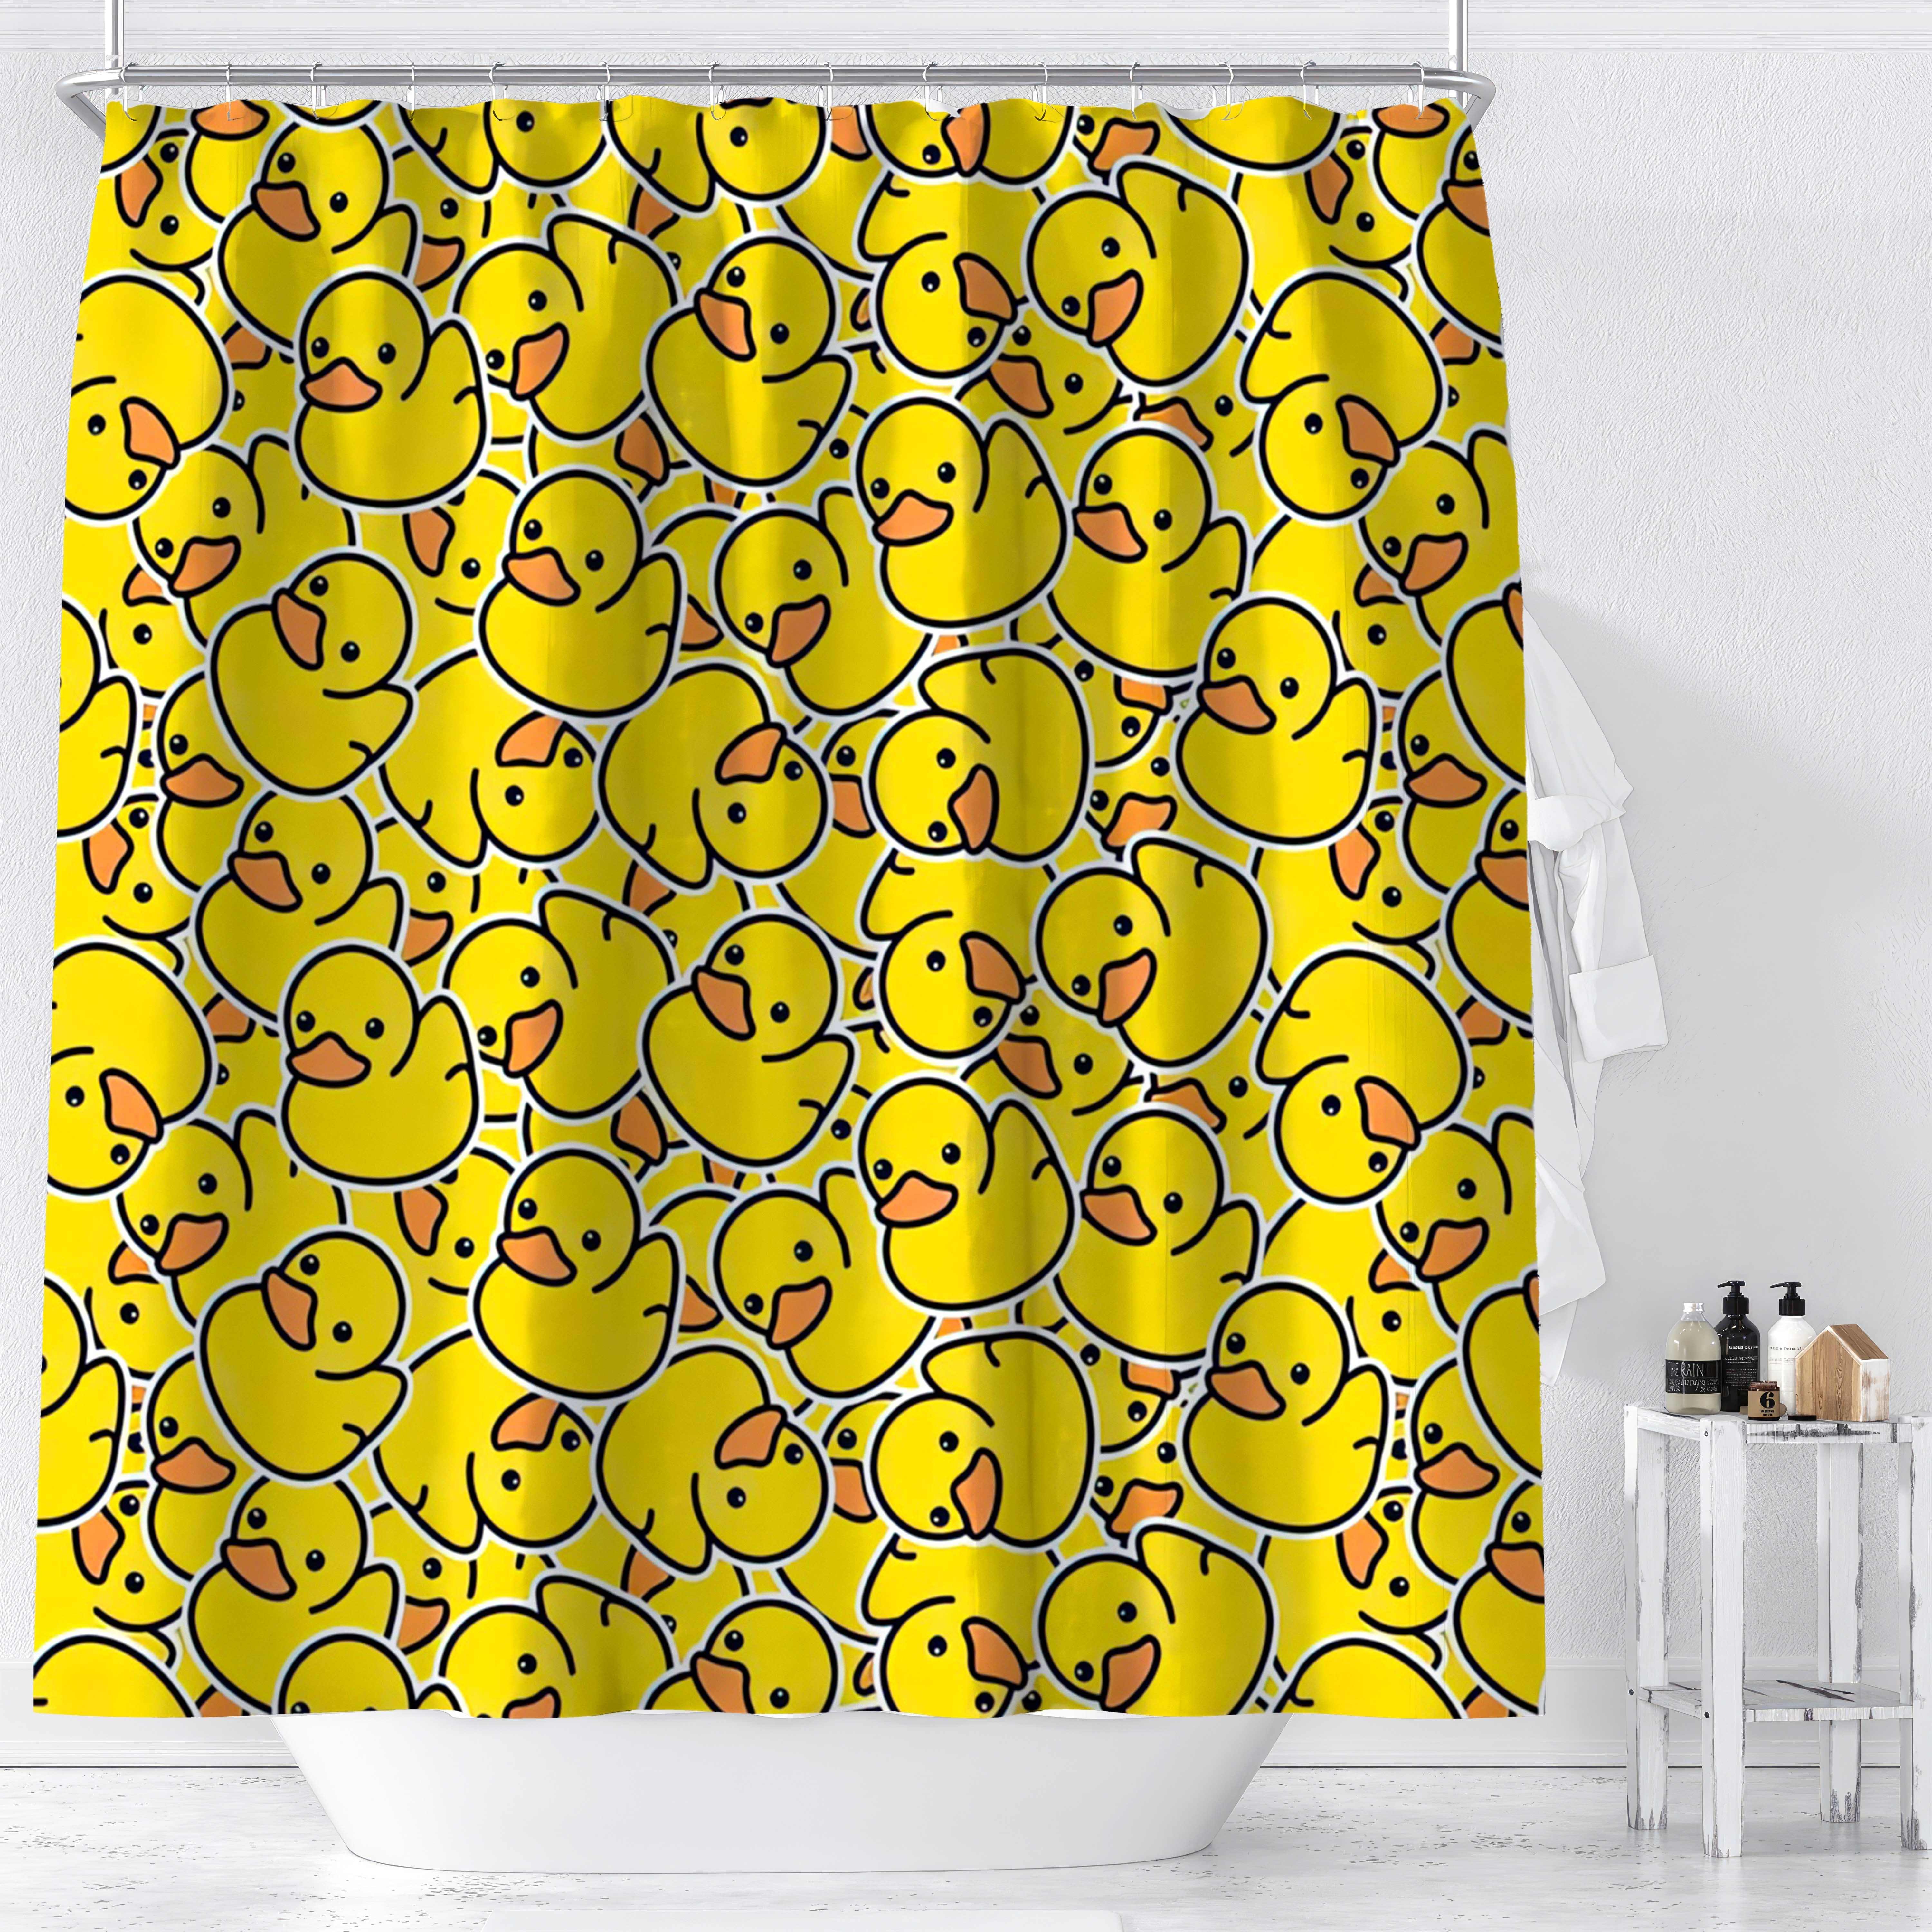 

Ywjhui Cartoon Duck Pattern Digital Print Shower Curtain, Water-resistant Polyester Fabric With Knit Weave, Machine Washable, Includes Hooks, All-season Animal Themed Bathroom Decor